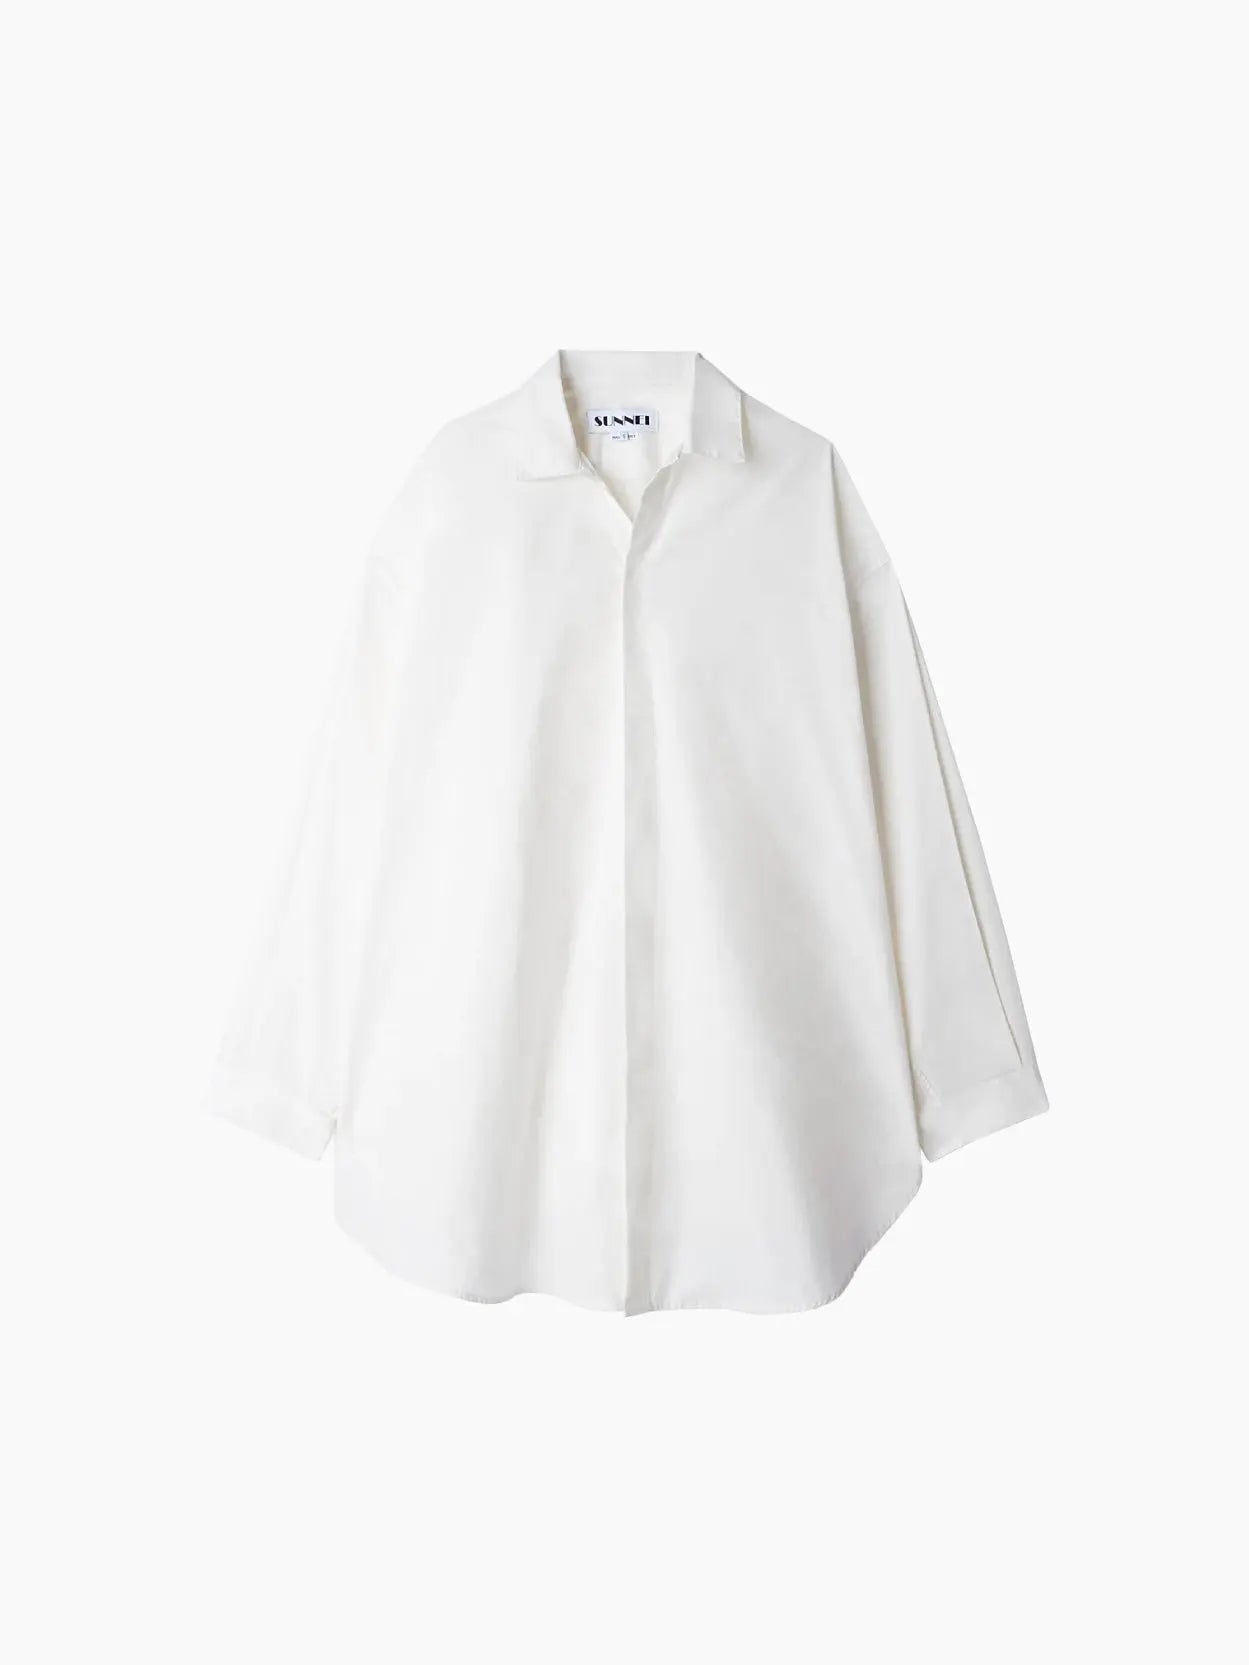 A white button-up shirt with long sleeves, a collar, and a loose, slightly oversized fit. The Mega Overshirt White has a minimalist design and appears to be made from lightweight fabric. A small tag with text is visible at the back of the collar, subtly nodding to its origins from Sunnei in Barcelona.